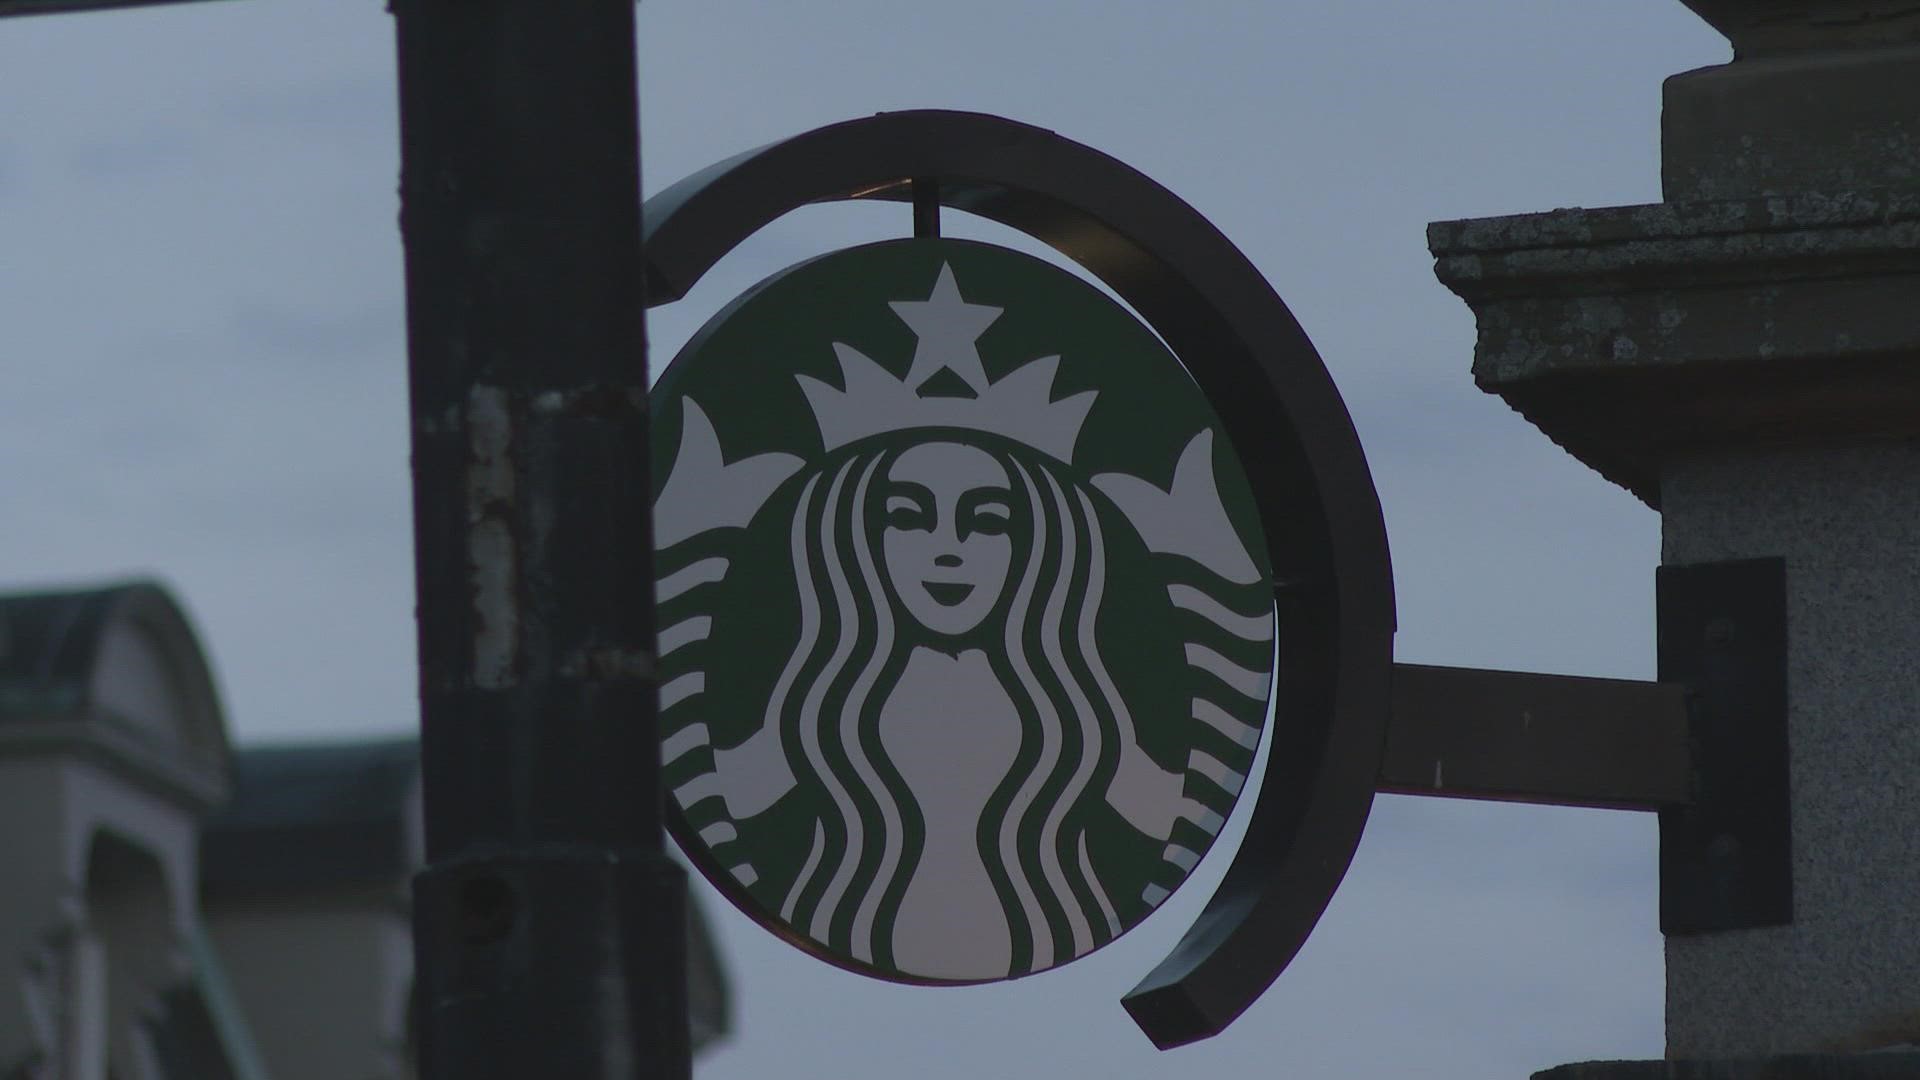 Starbucks located at 176 Middle Street in Portland has filed to unionize, a Twitter post says.